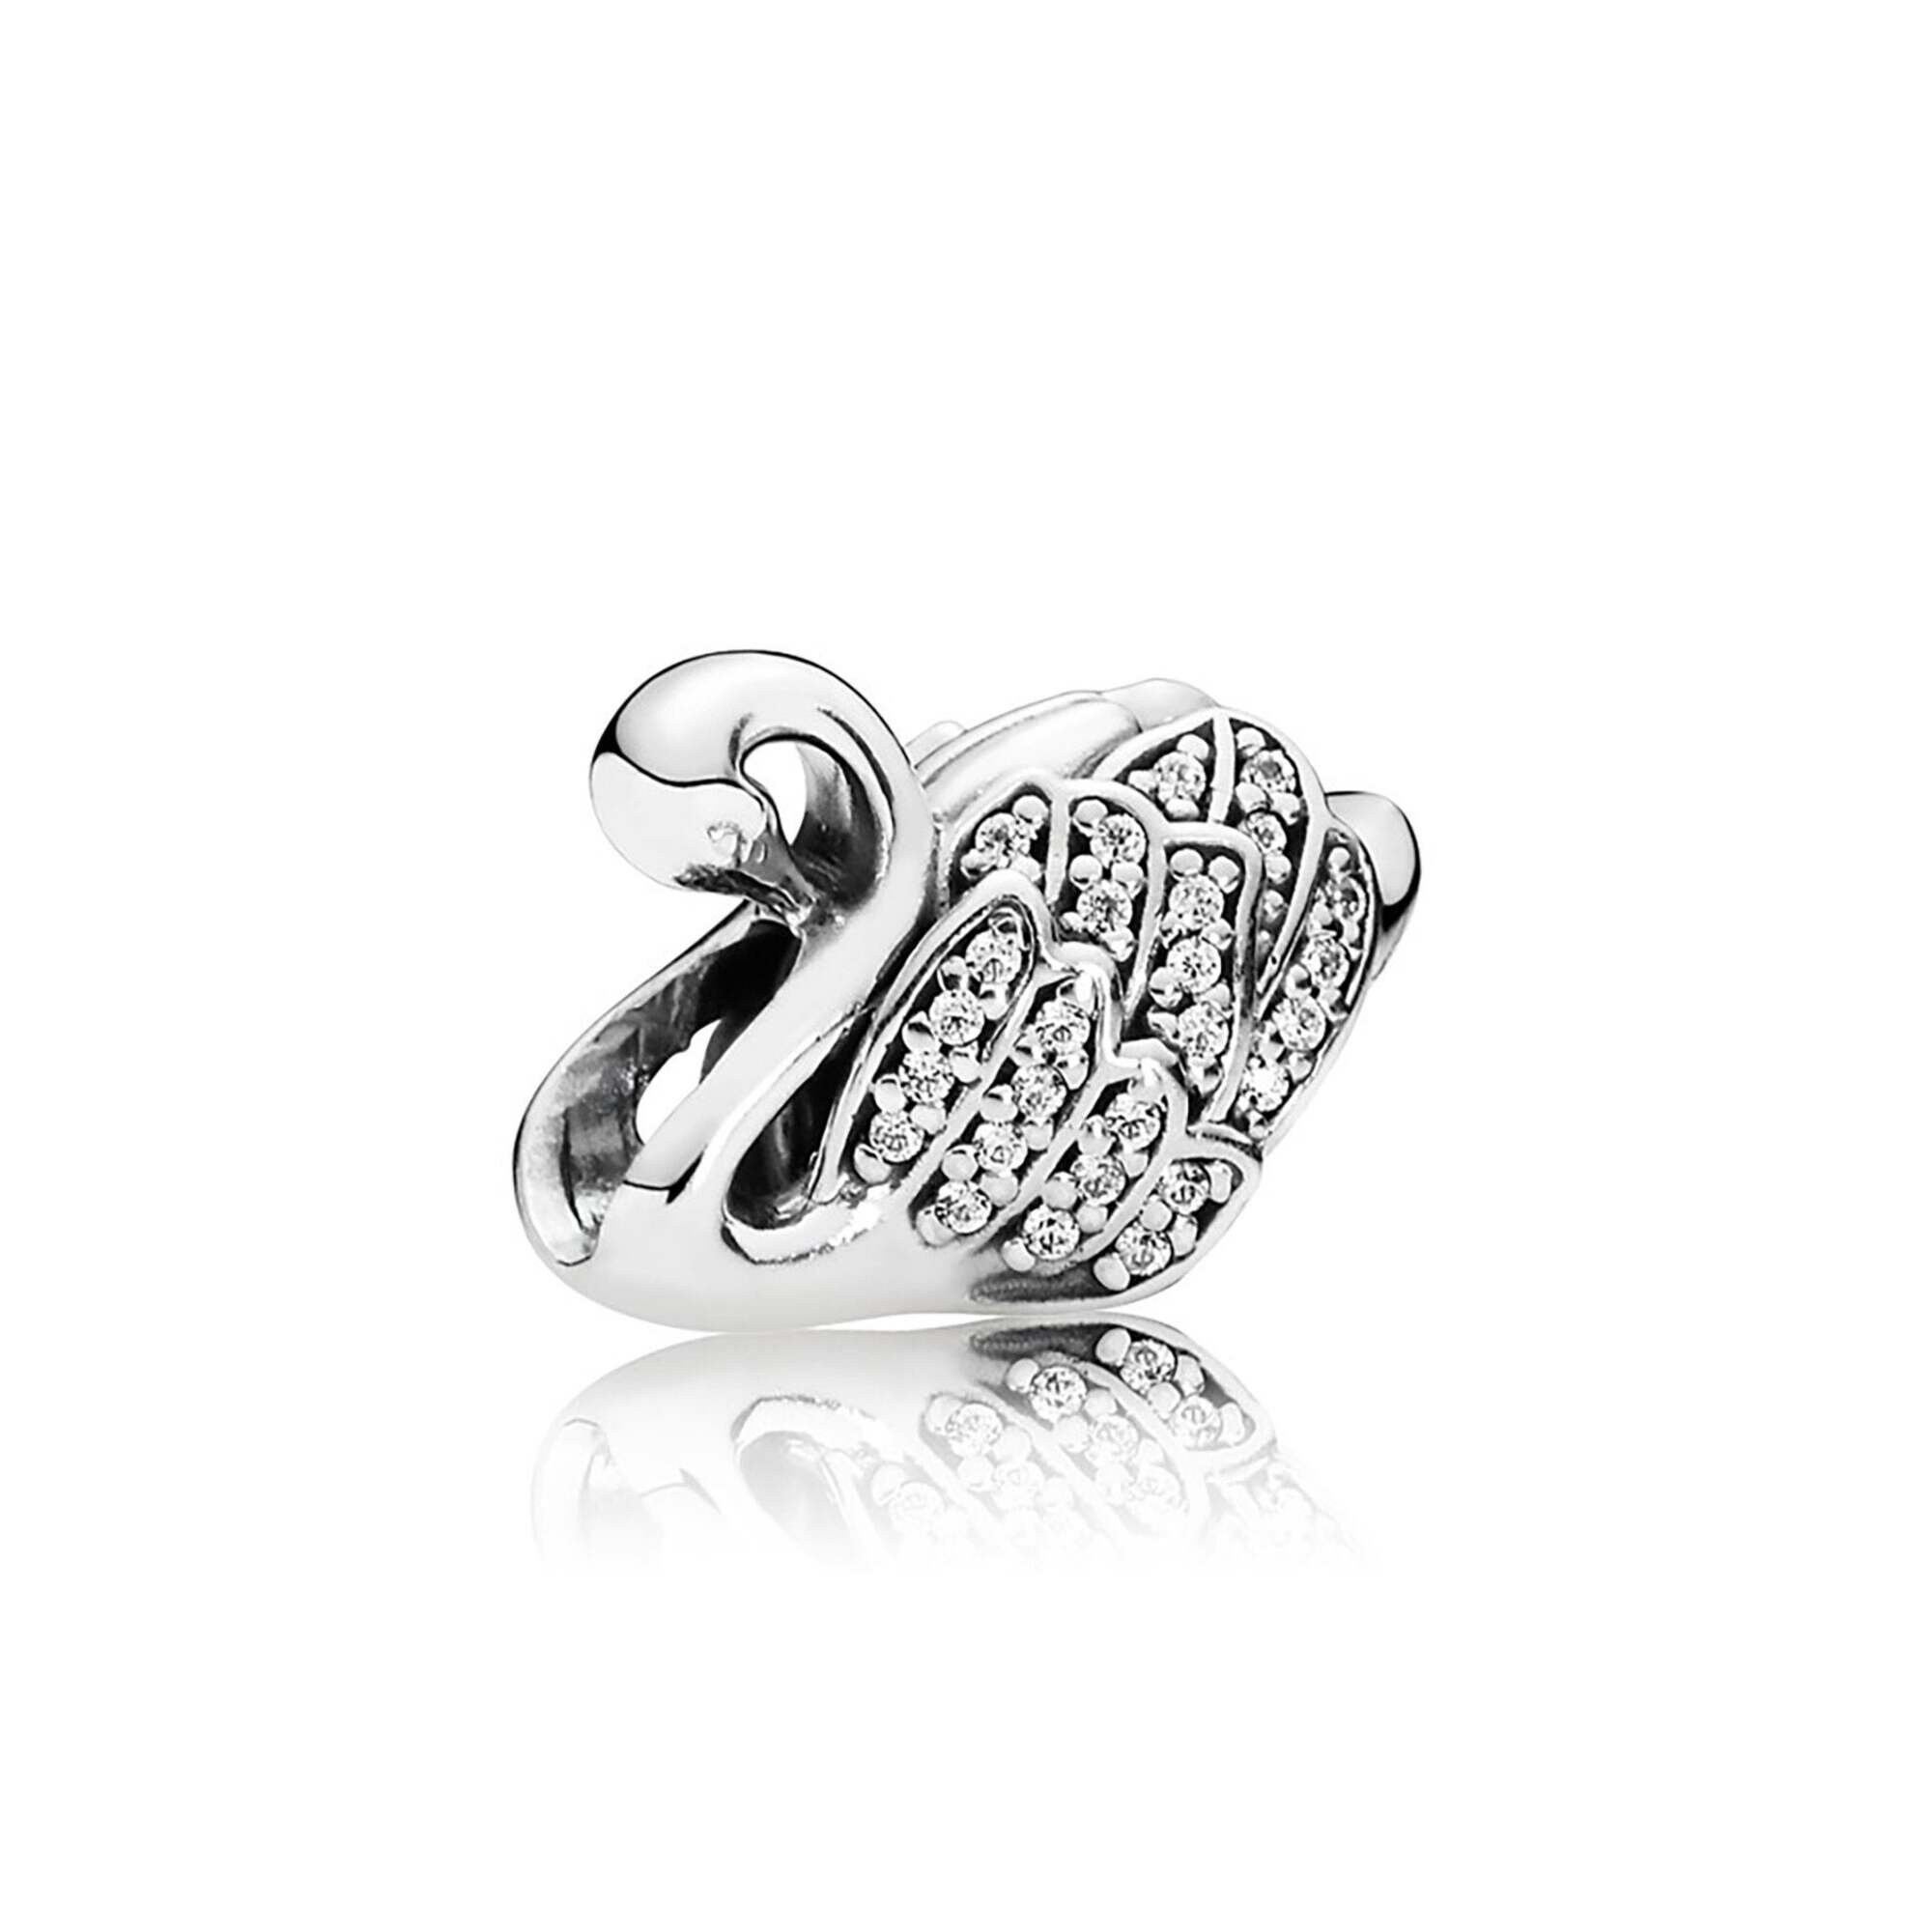 Lilla Emigrere assimilation Buy Charms for Pandora Bracelet 925 Sterling Silverswan Silver Online in  India - Etsy